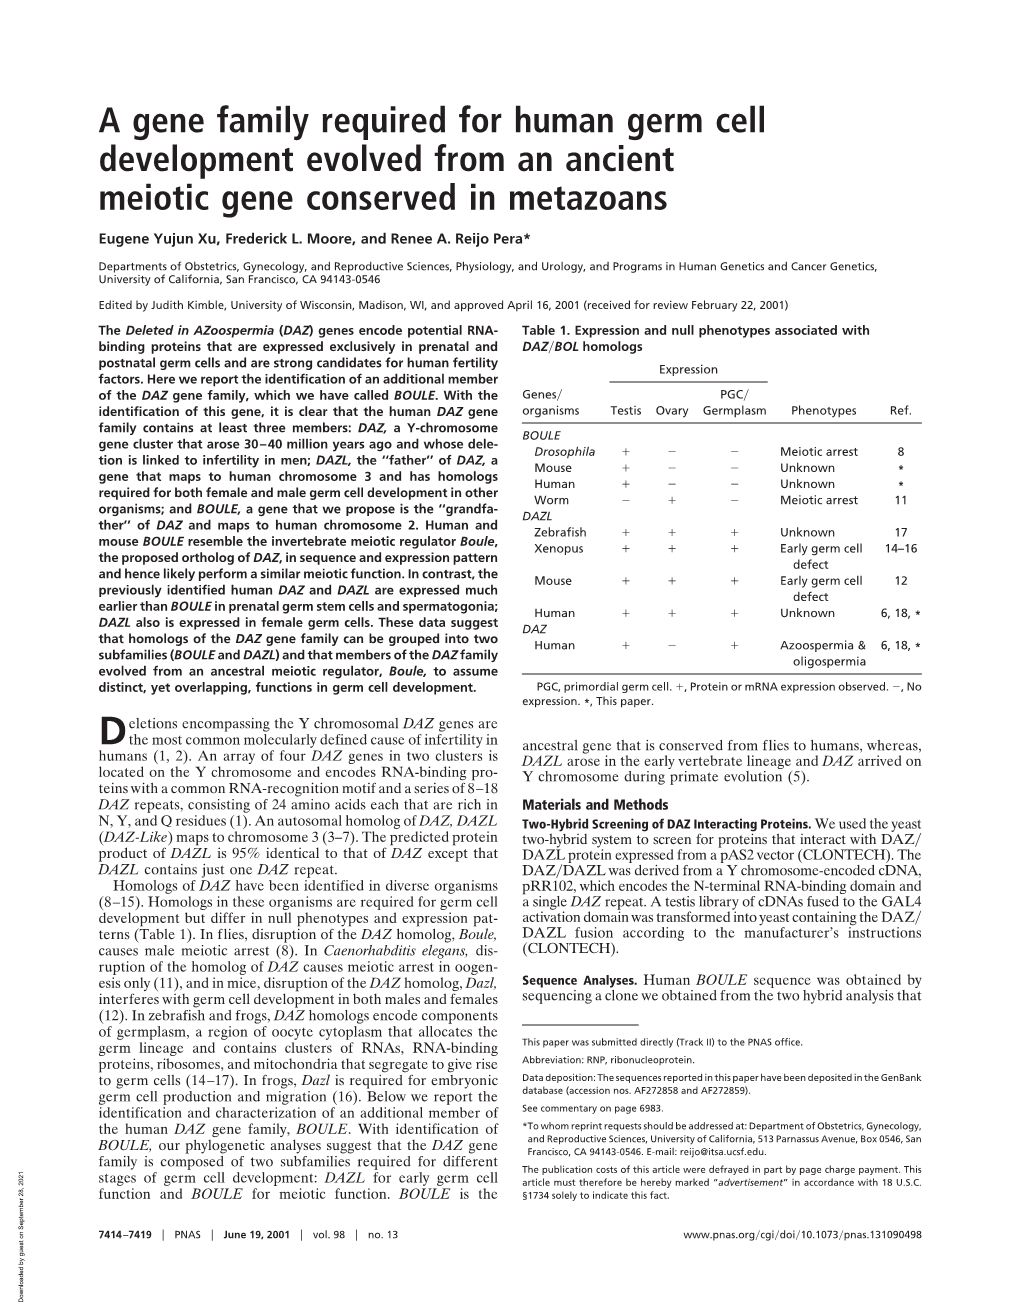 A Gene Family Required for Human Germ Cell Development Evolved from an Ancient Meiotic Gene Conserved in Metazoans